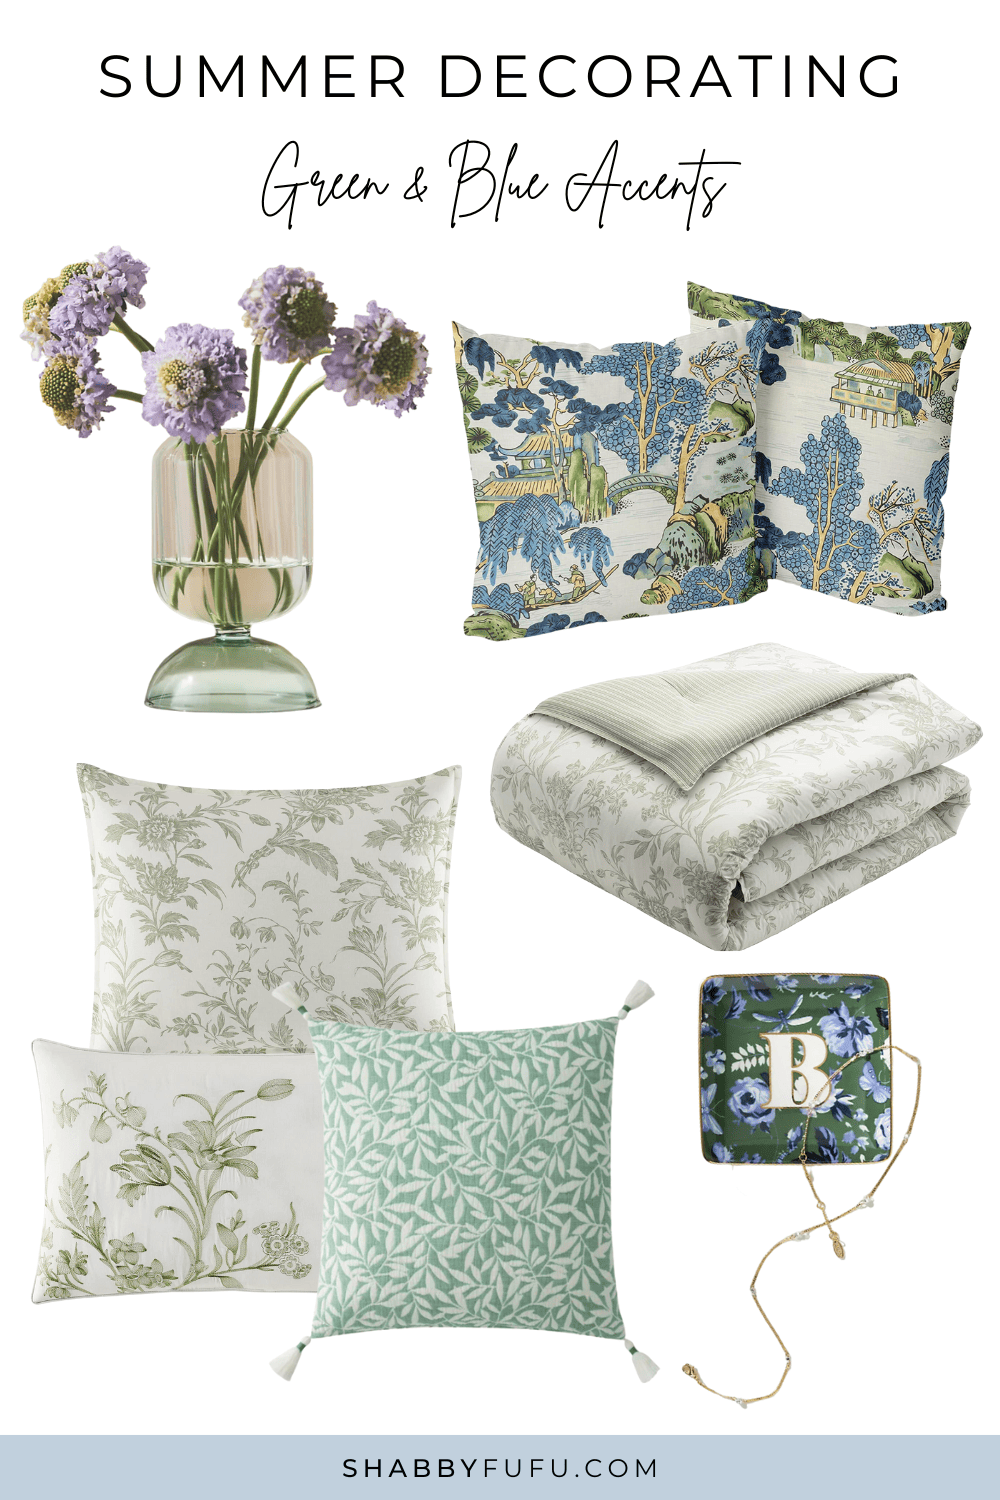 collage image of green and blue products for summer decorating